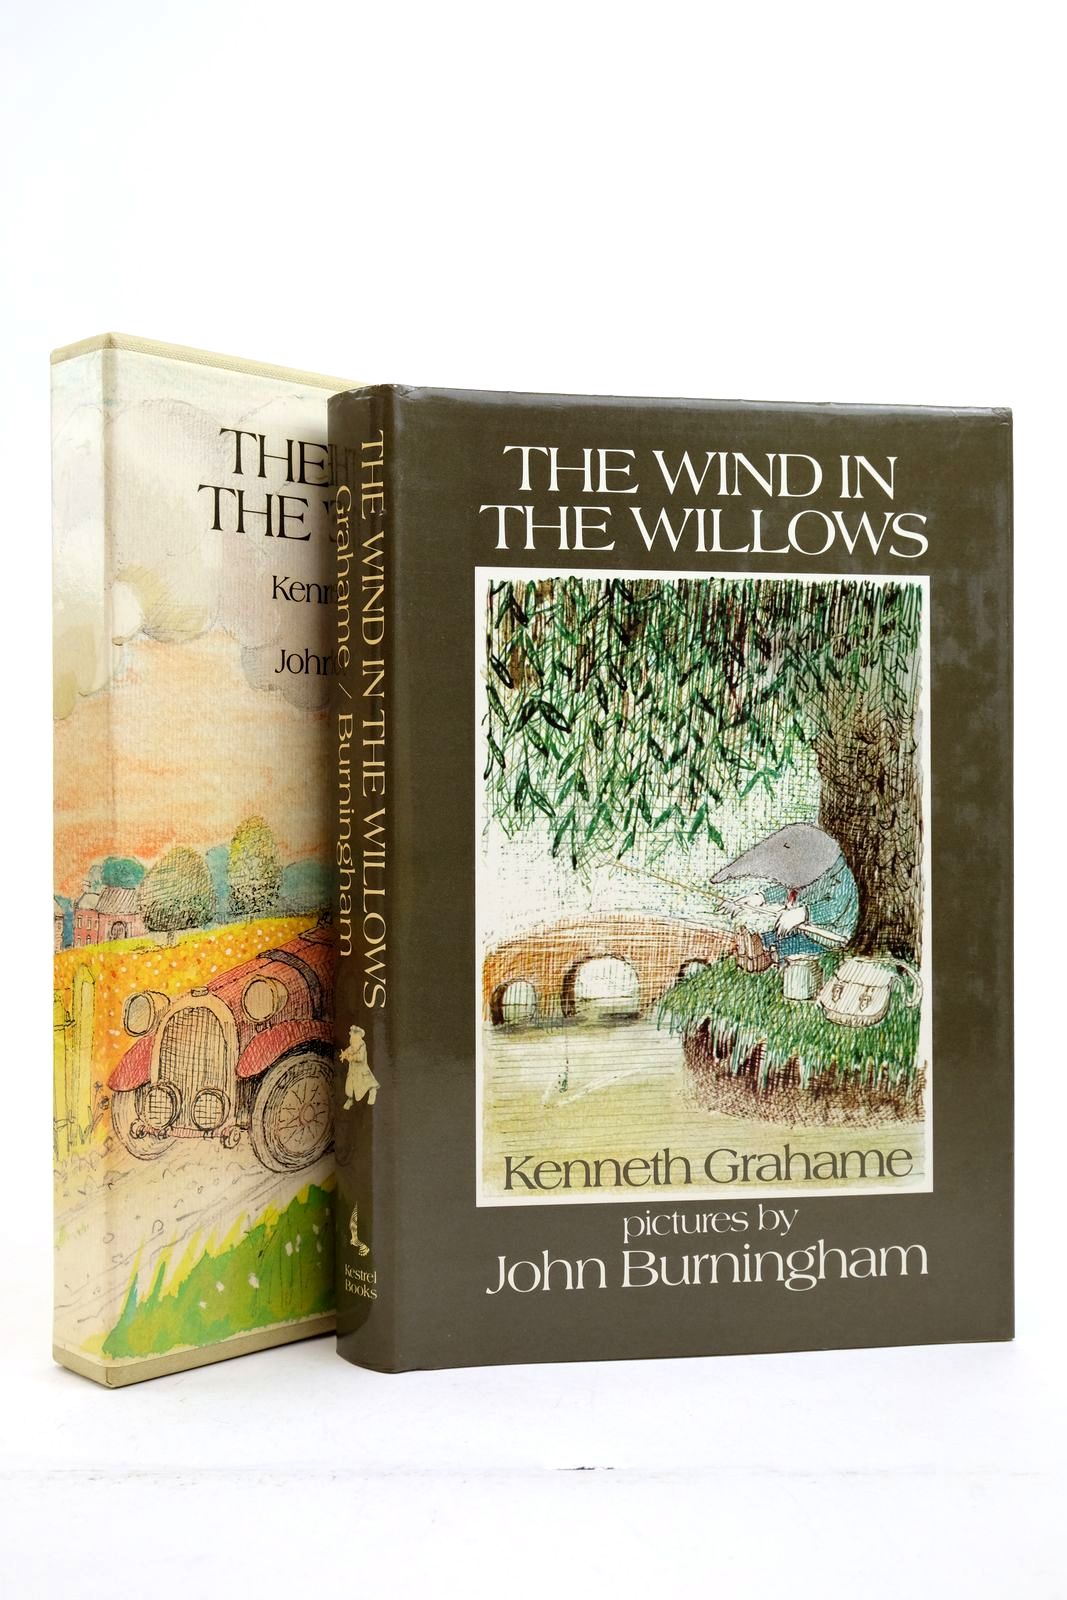 Photo of THE WIND IN THE WILLOWS written by Grahame, Kenneth illustrated by Burningham, John published by Kestrel Books (STOCK CODE: 2139532)  for sale by Stella & Rose's Books